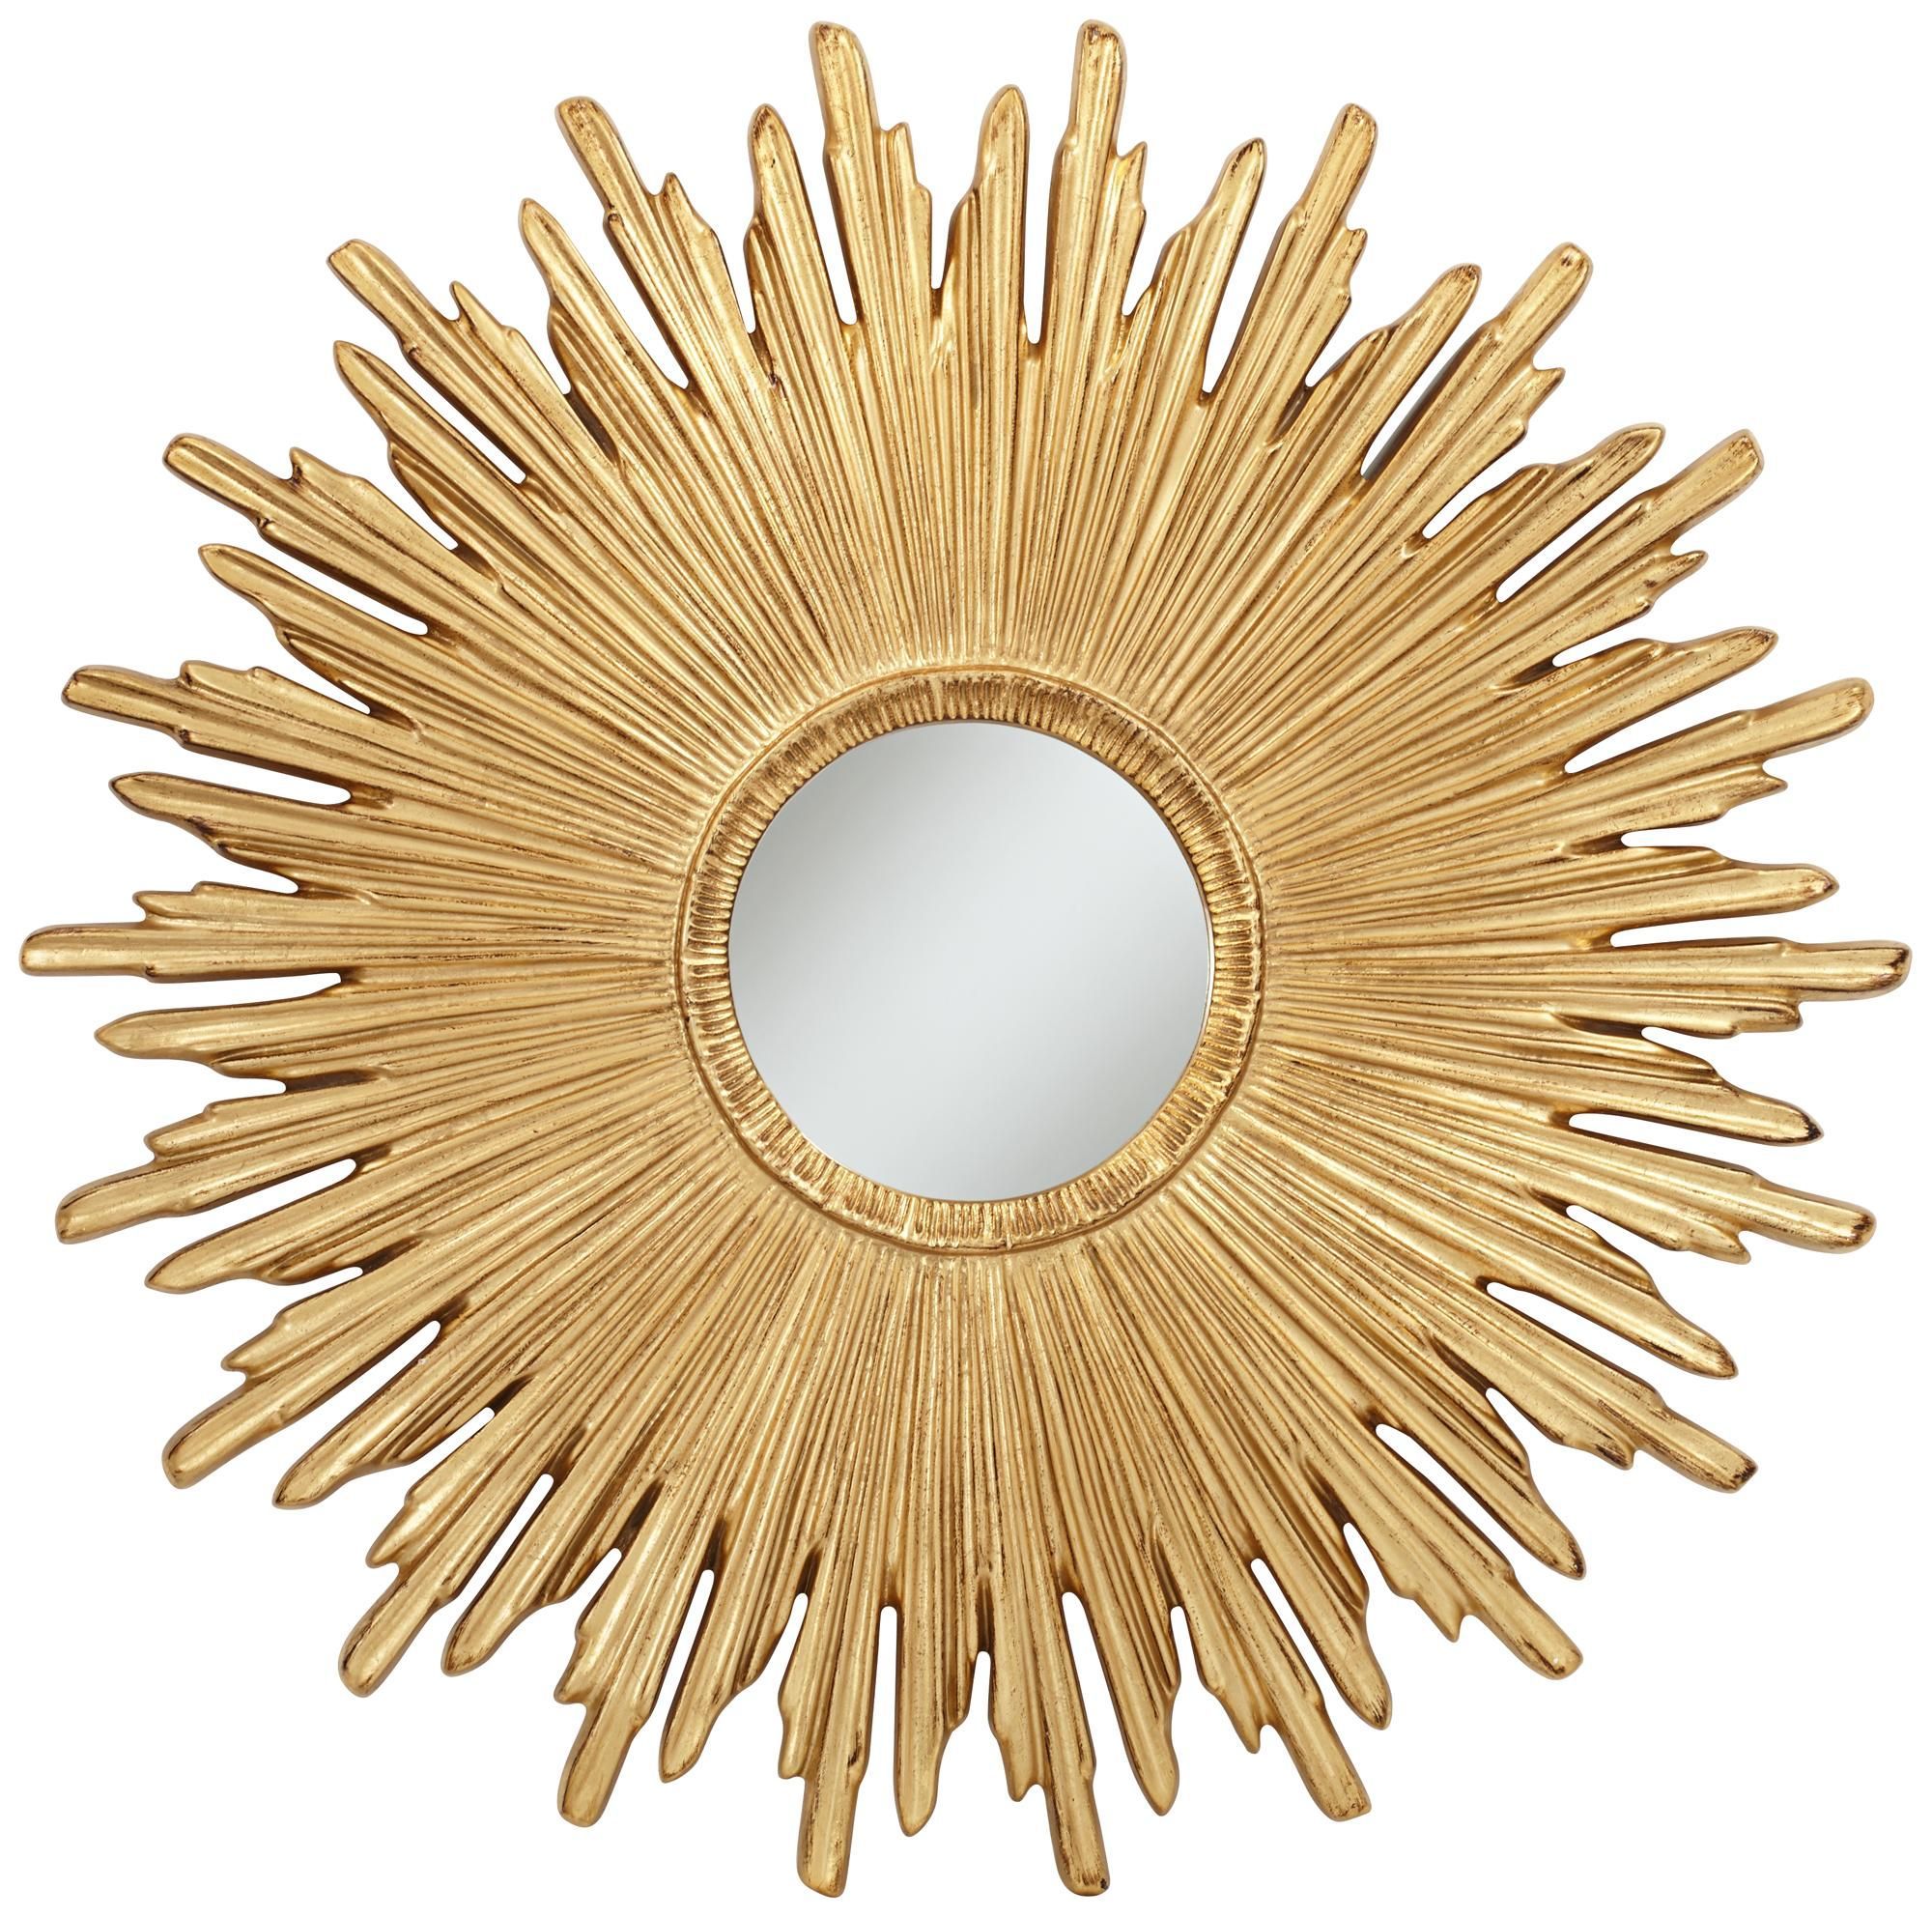 Golden Sunrays 43" Wide Round Wall Mirror | Mirror Wall, Round Wall With Regard To Golden Voyage Round Wall Mirrors (View 1 of 15)